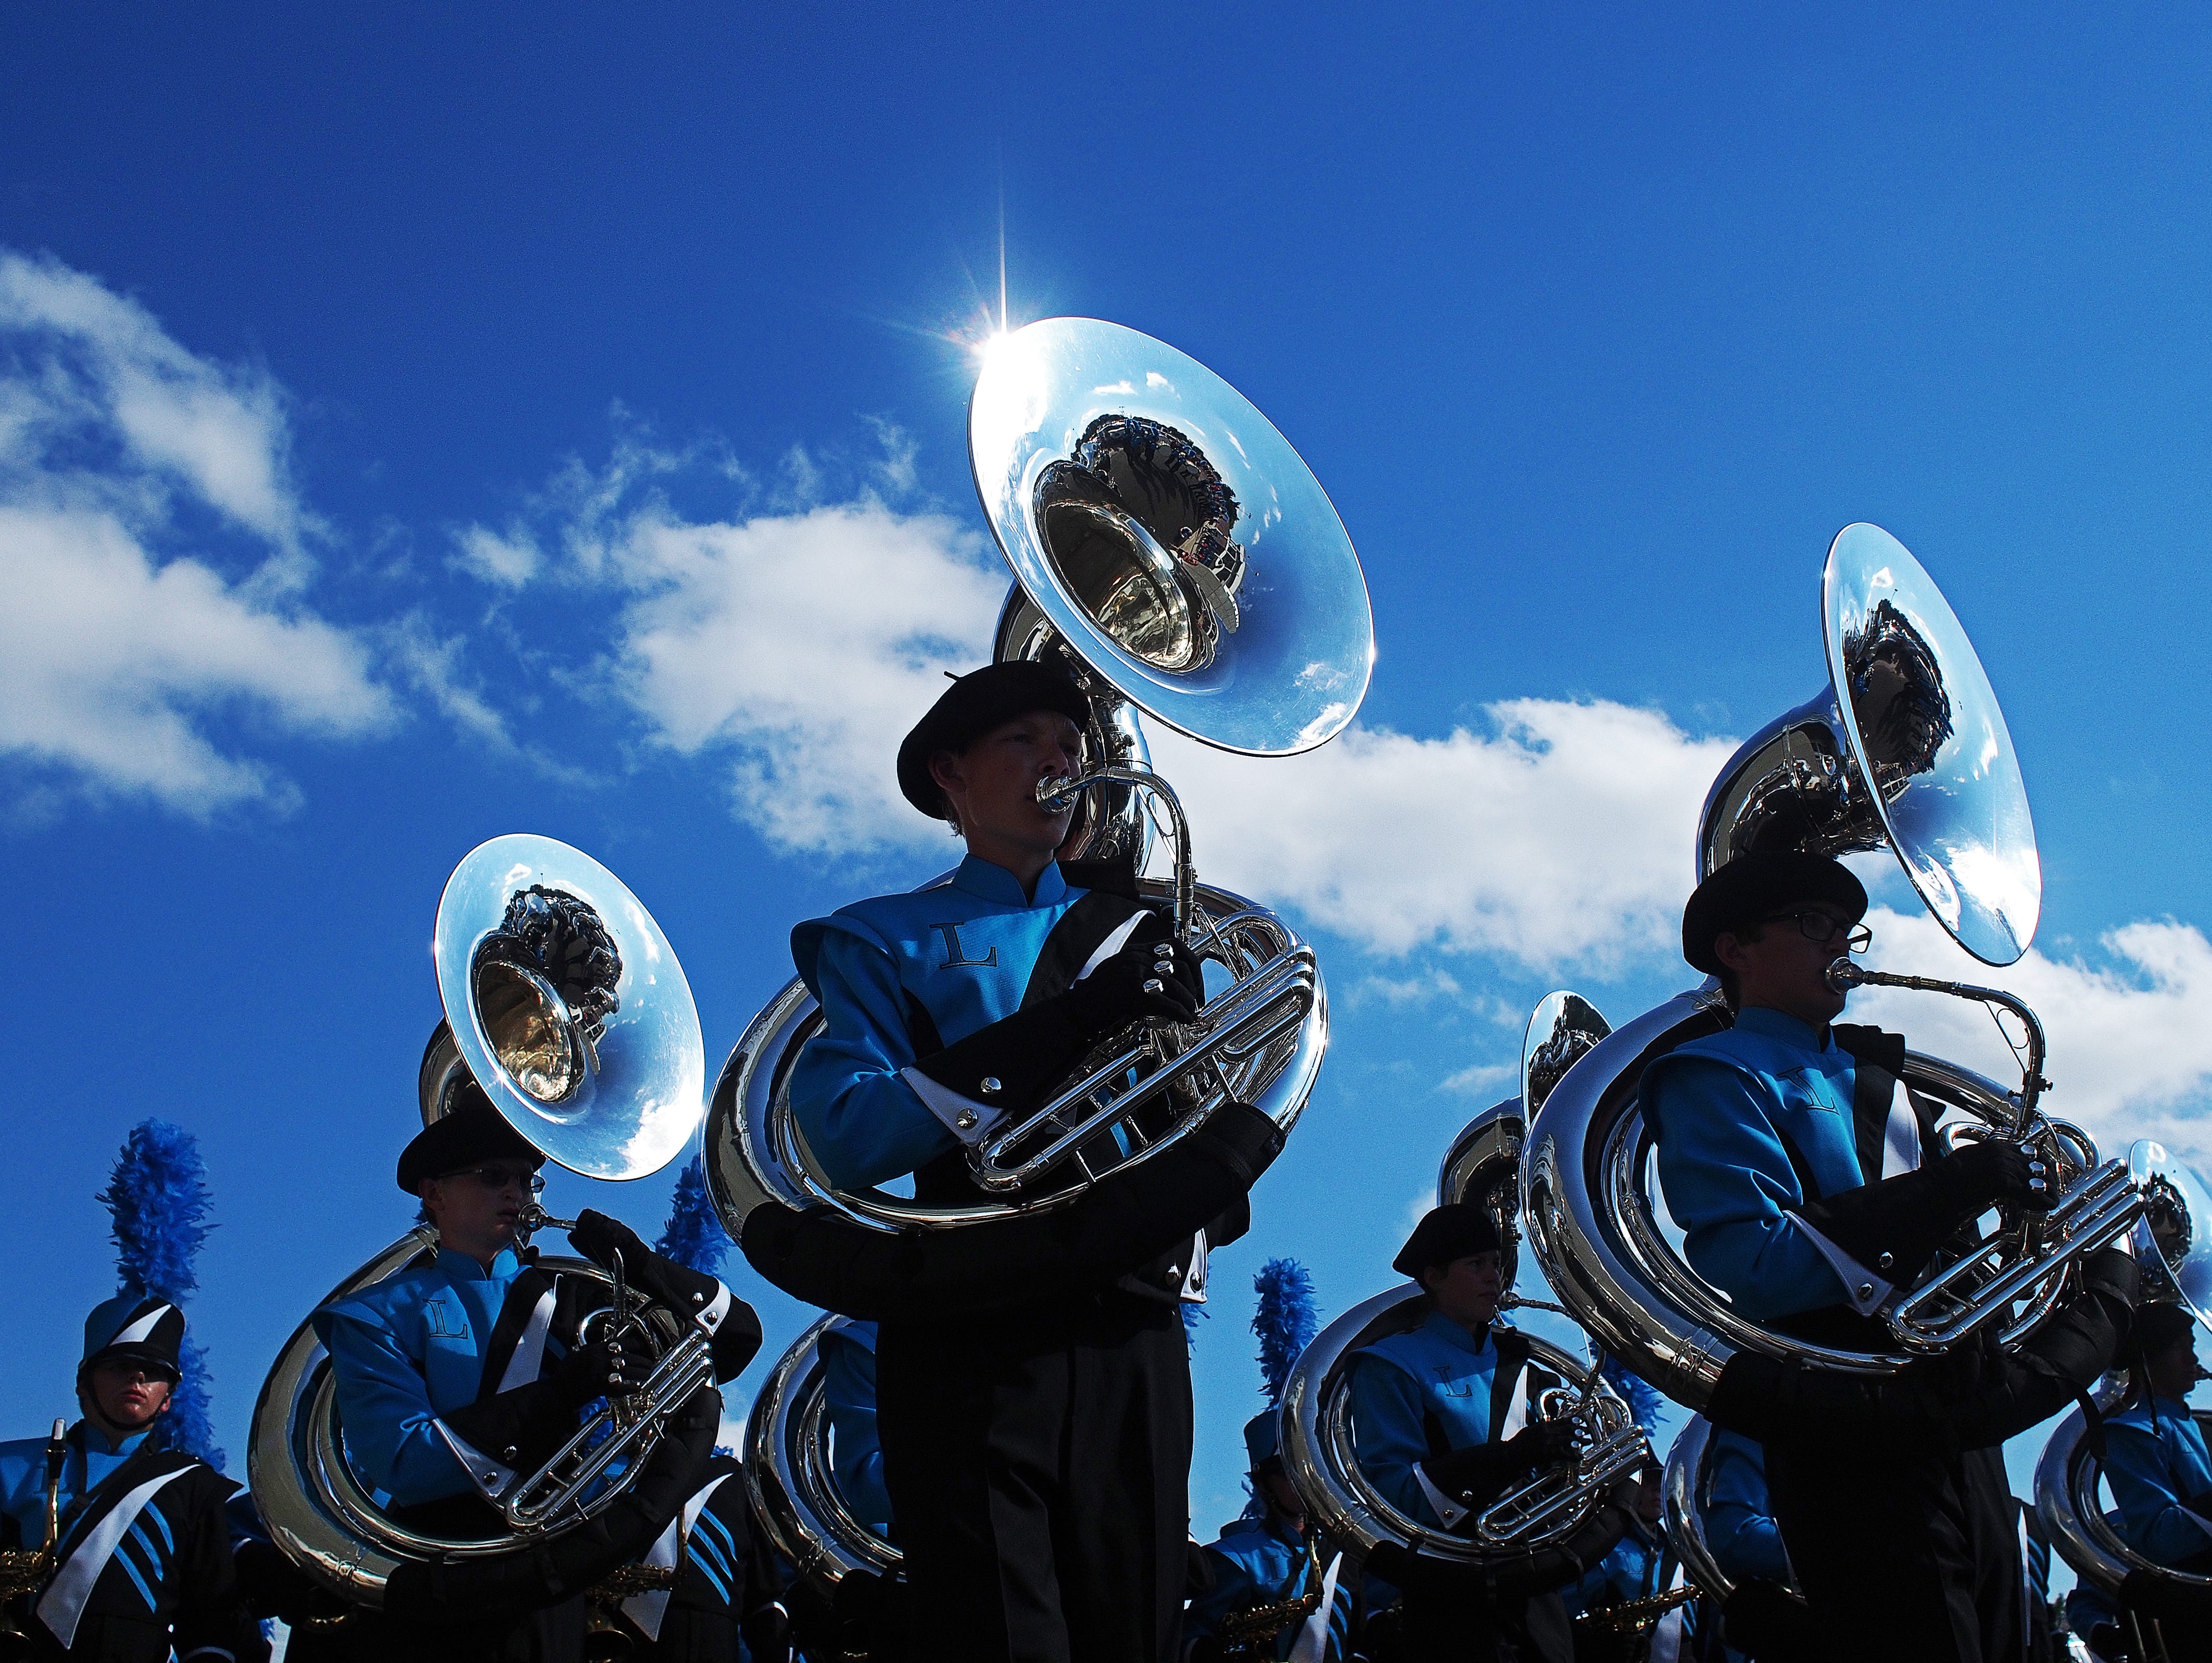 The Lincoln High School marching band performs before a football game between Lincoln and Rapid City Stevens Saturday, Aug. 27, 2016, at Howard Wood Field in Sioux Falls.